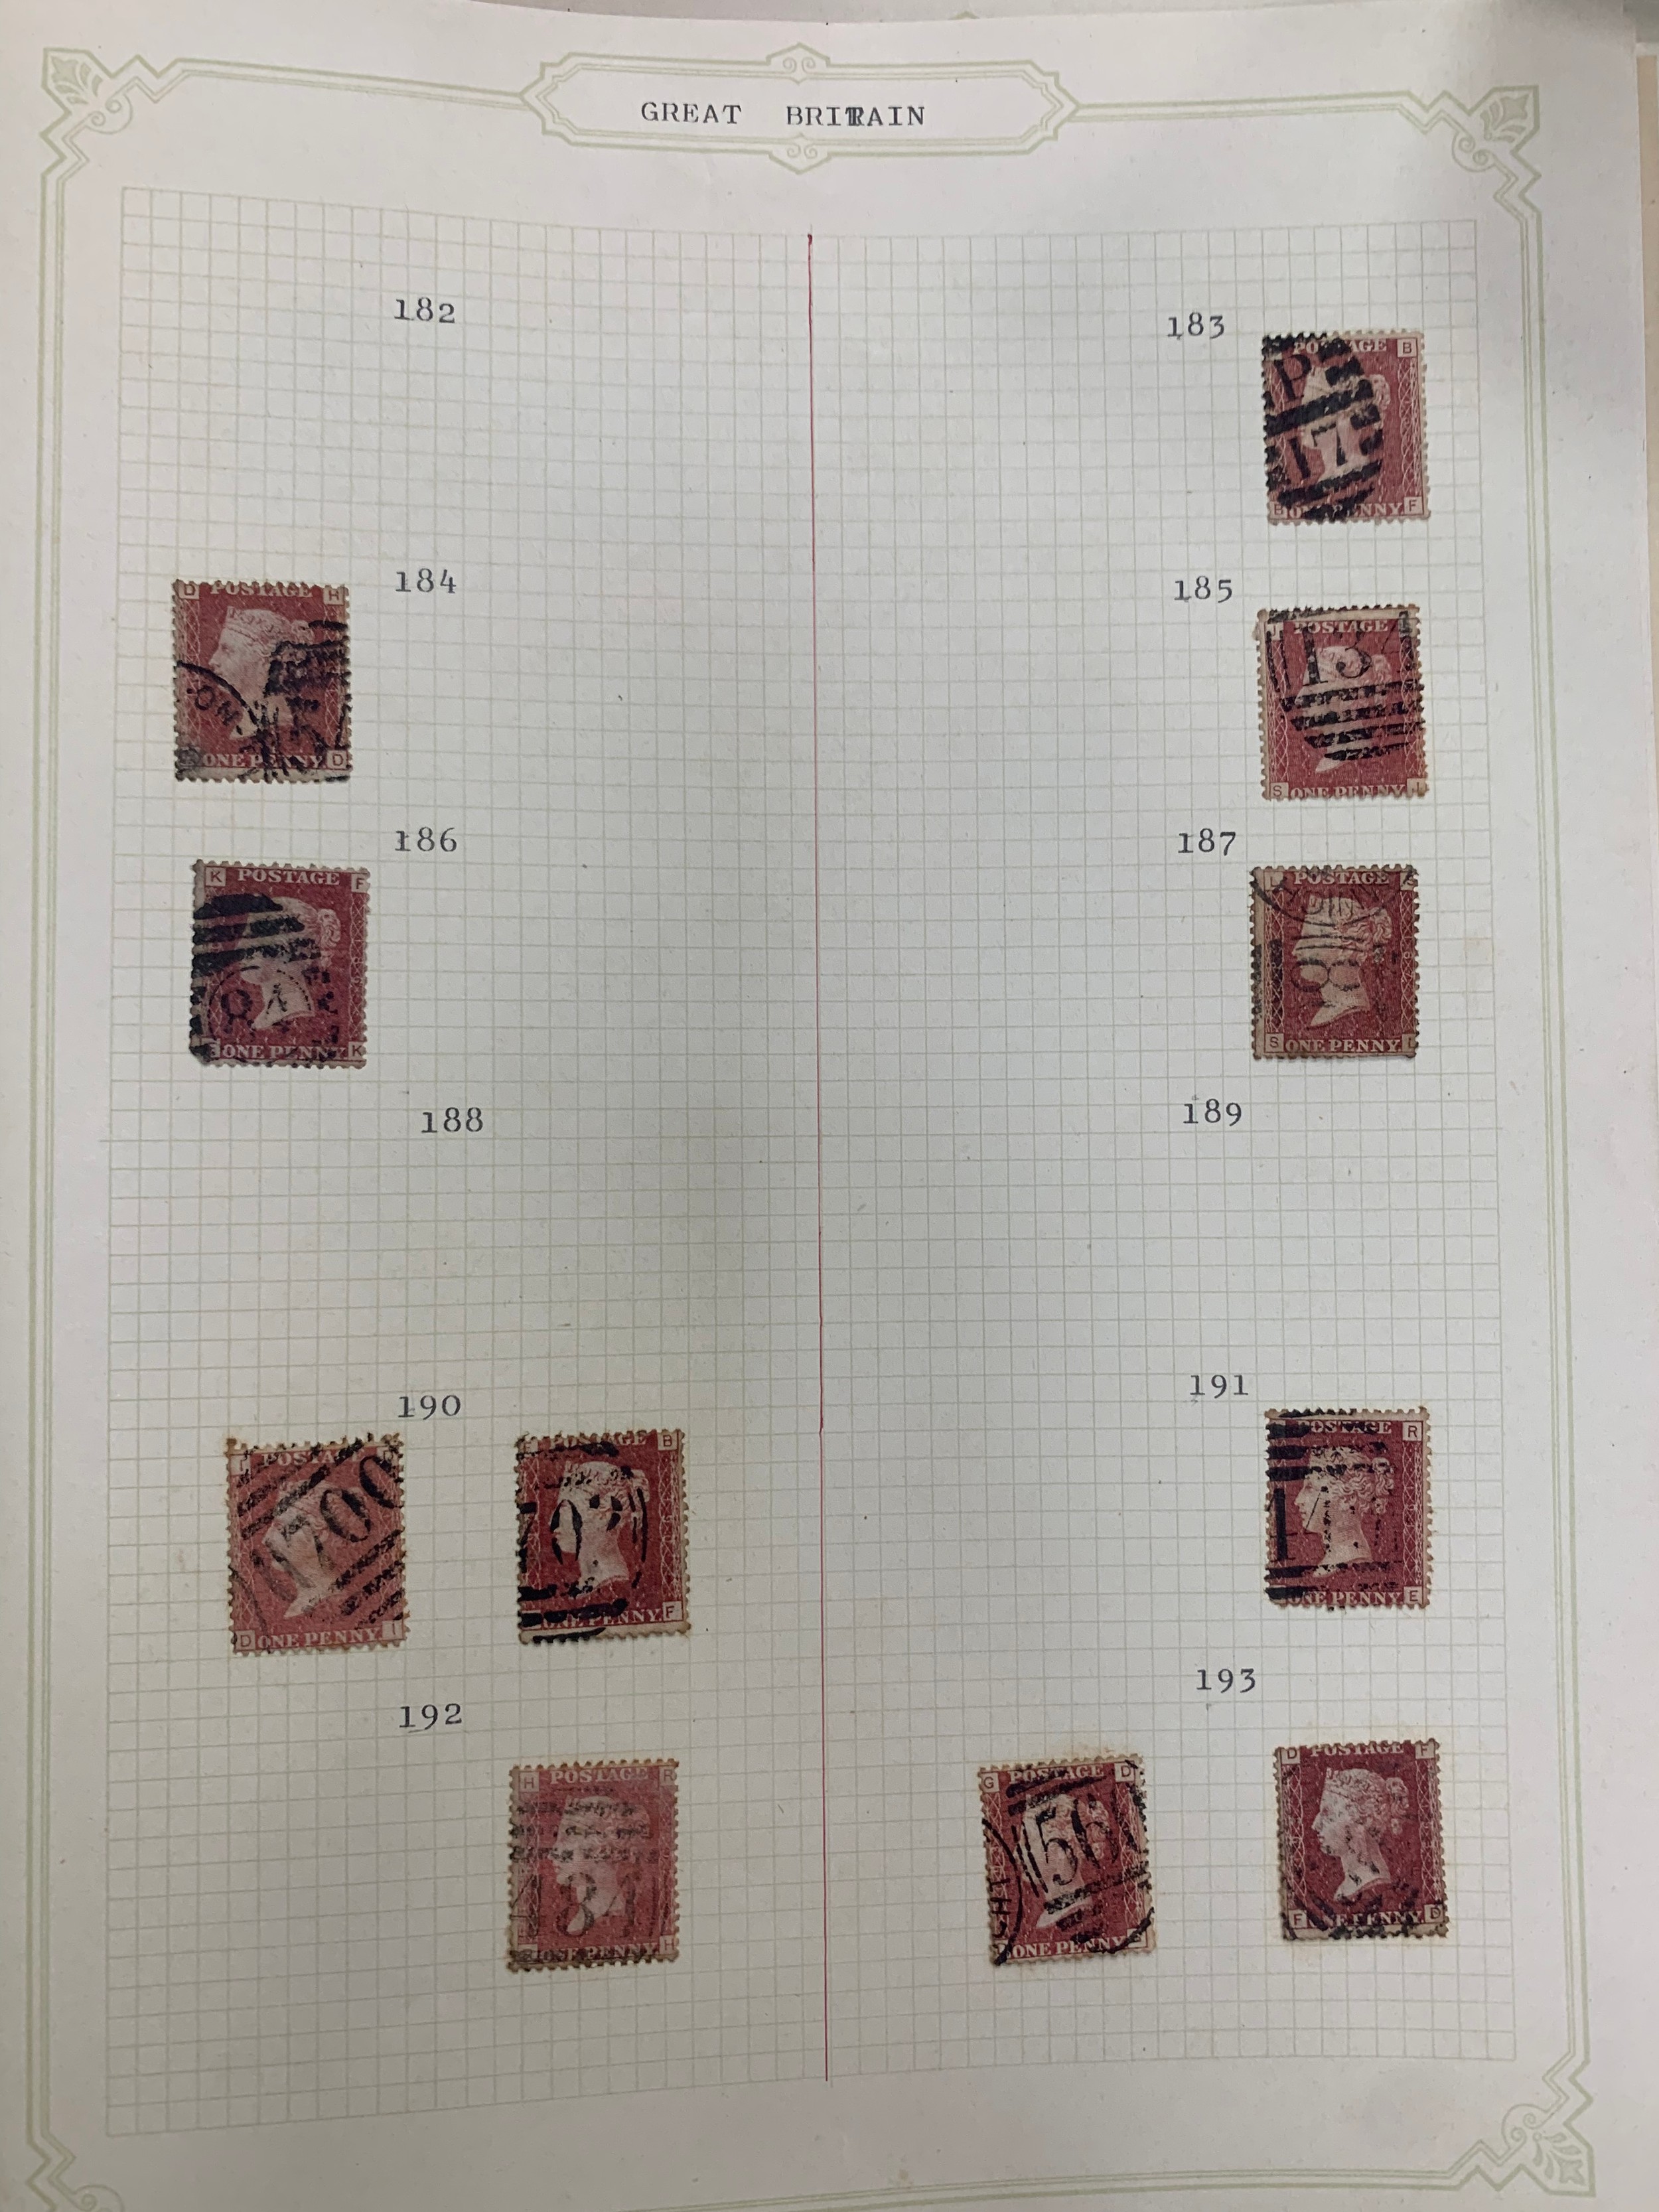 Great Britain, 1858-64 annotated and well-laid out collection of 1d Penny Reds FU from plate 73 to - Image 9 of 12